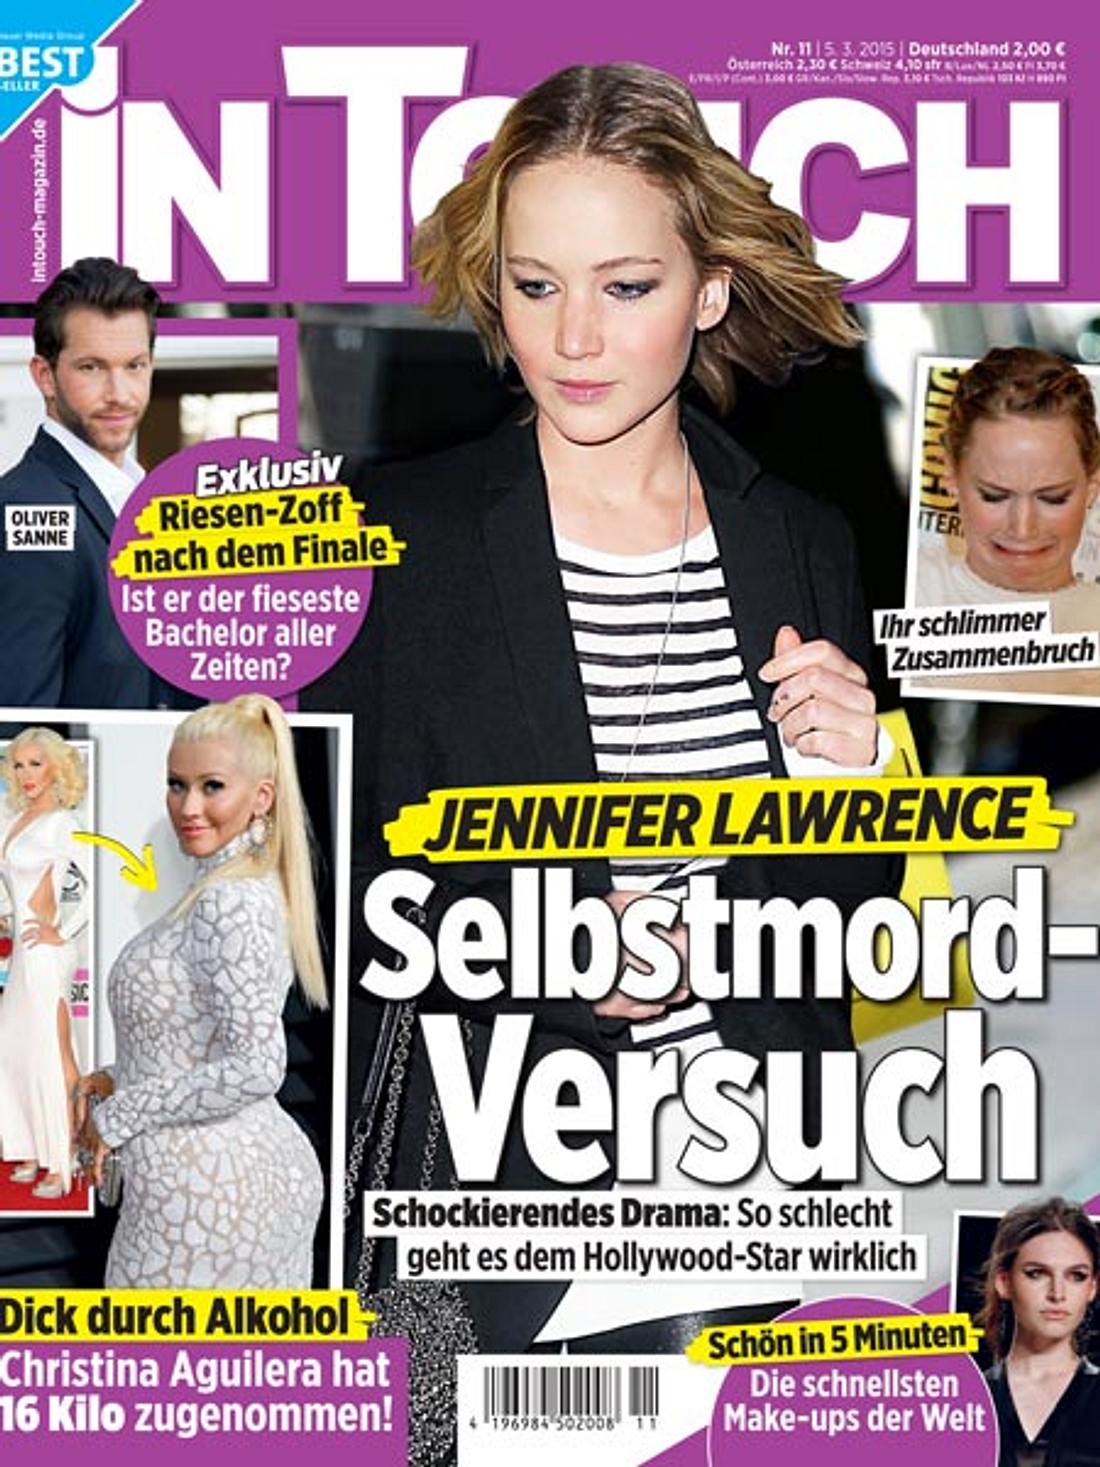 InTouch: Jennifer Lawrence - Selbstmord-Versuch!